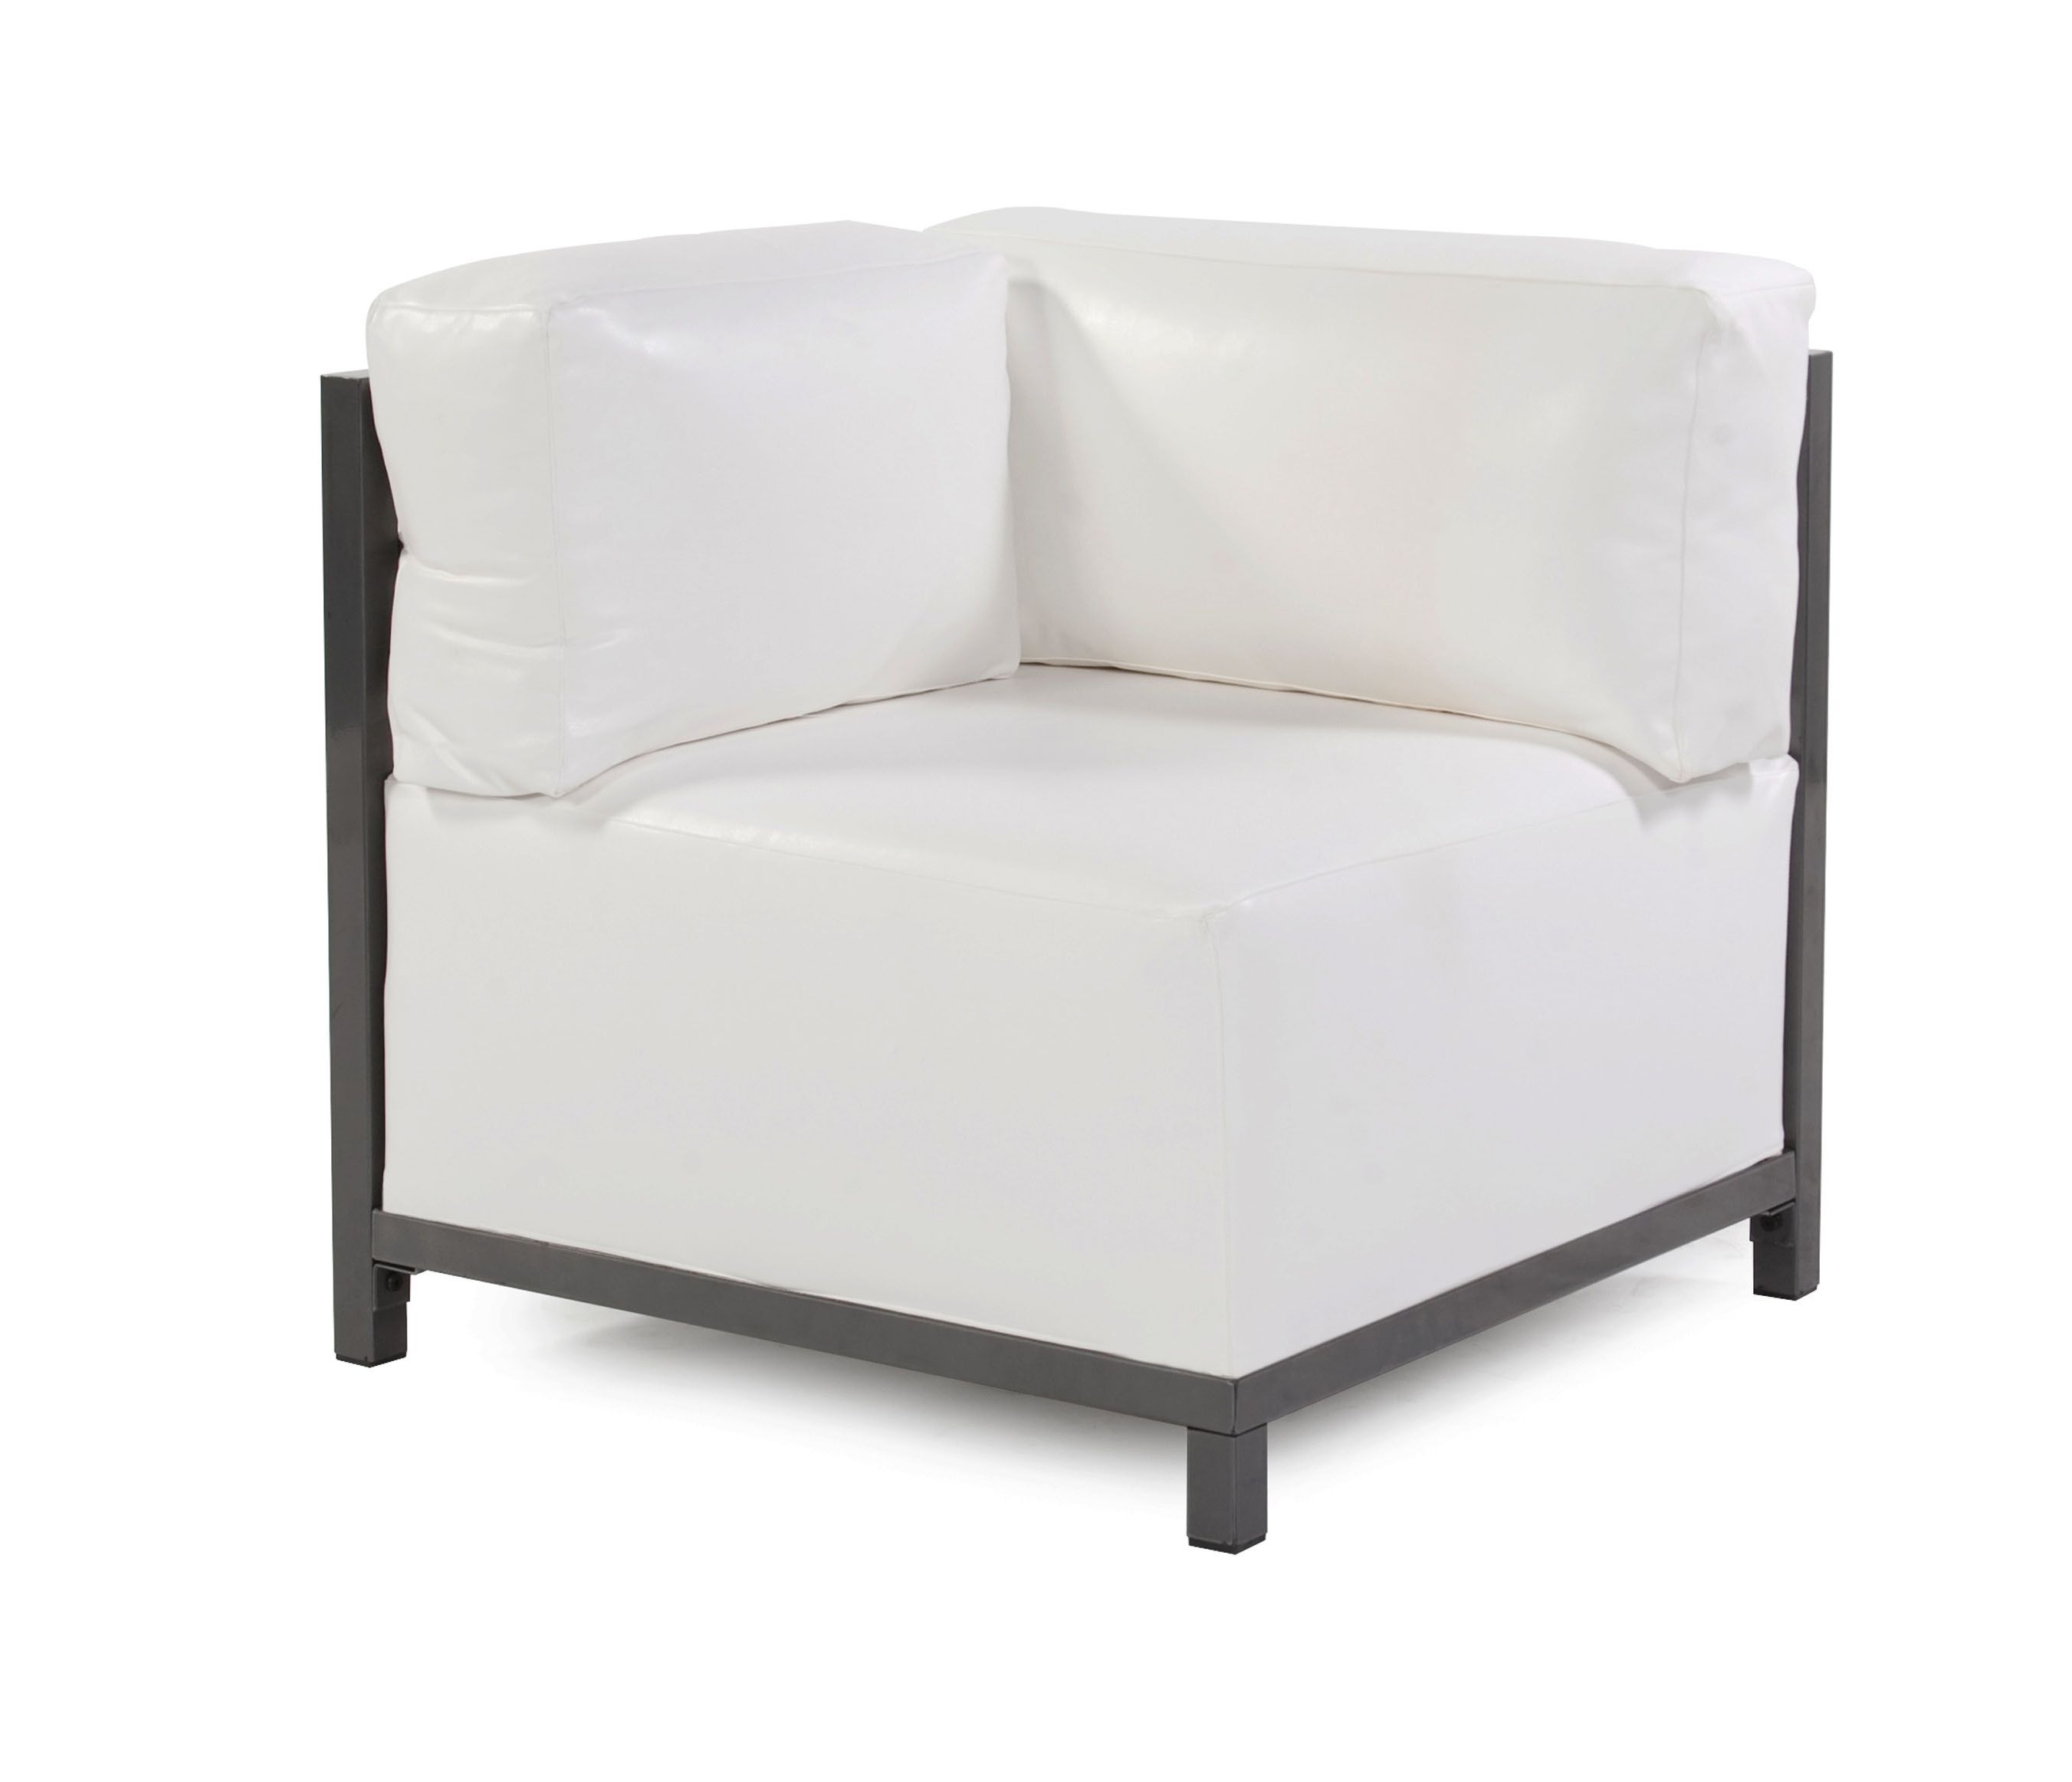 Well Known Chaise Lounge Chairs At Target Pertaining To Convertible Chair : Lounge Cushions Chair With Ottoman Patio (View 10 of 15)